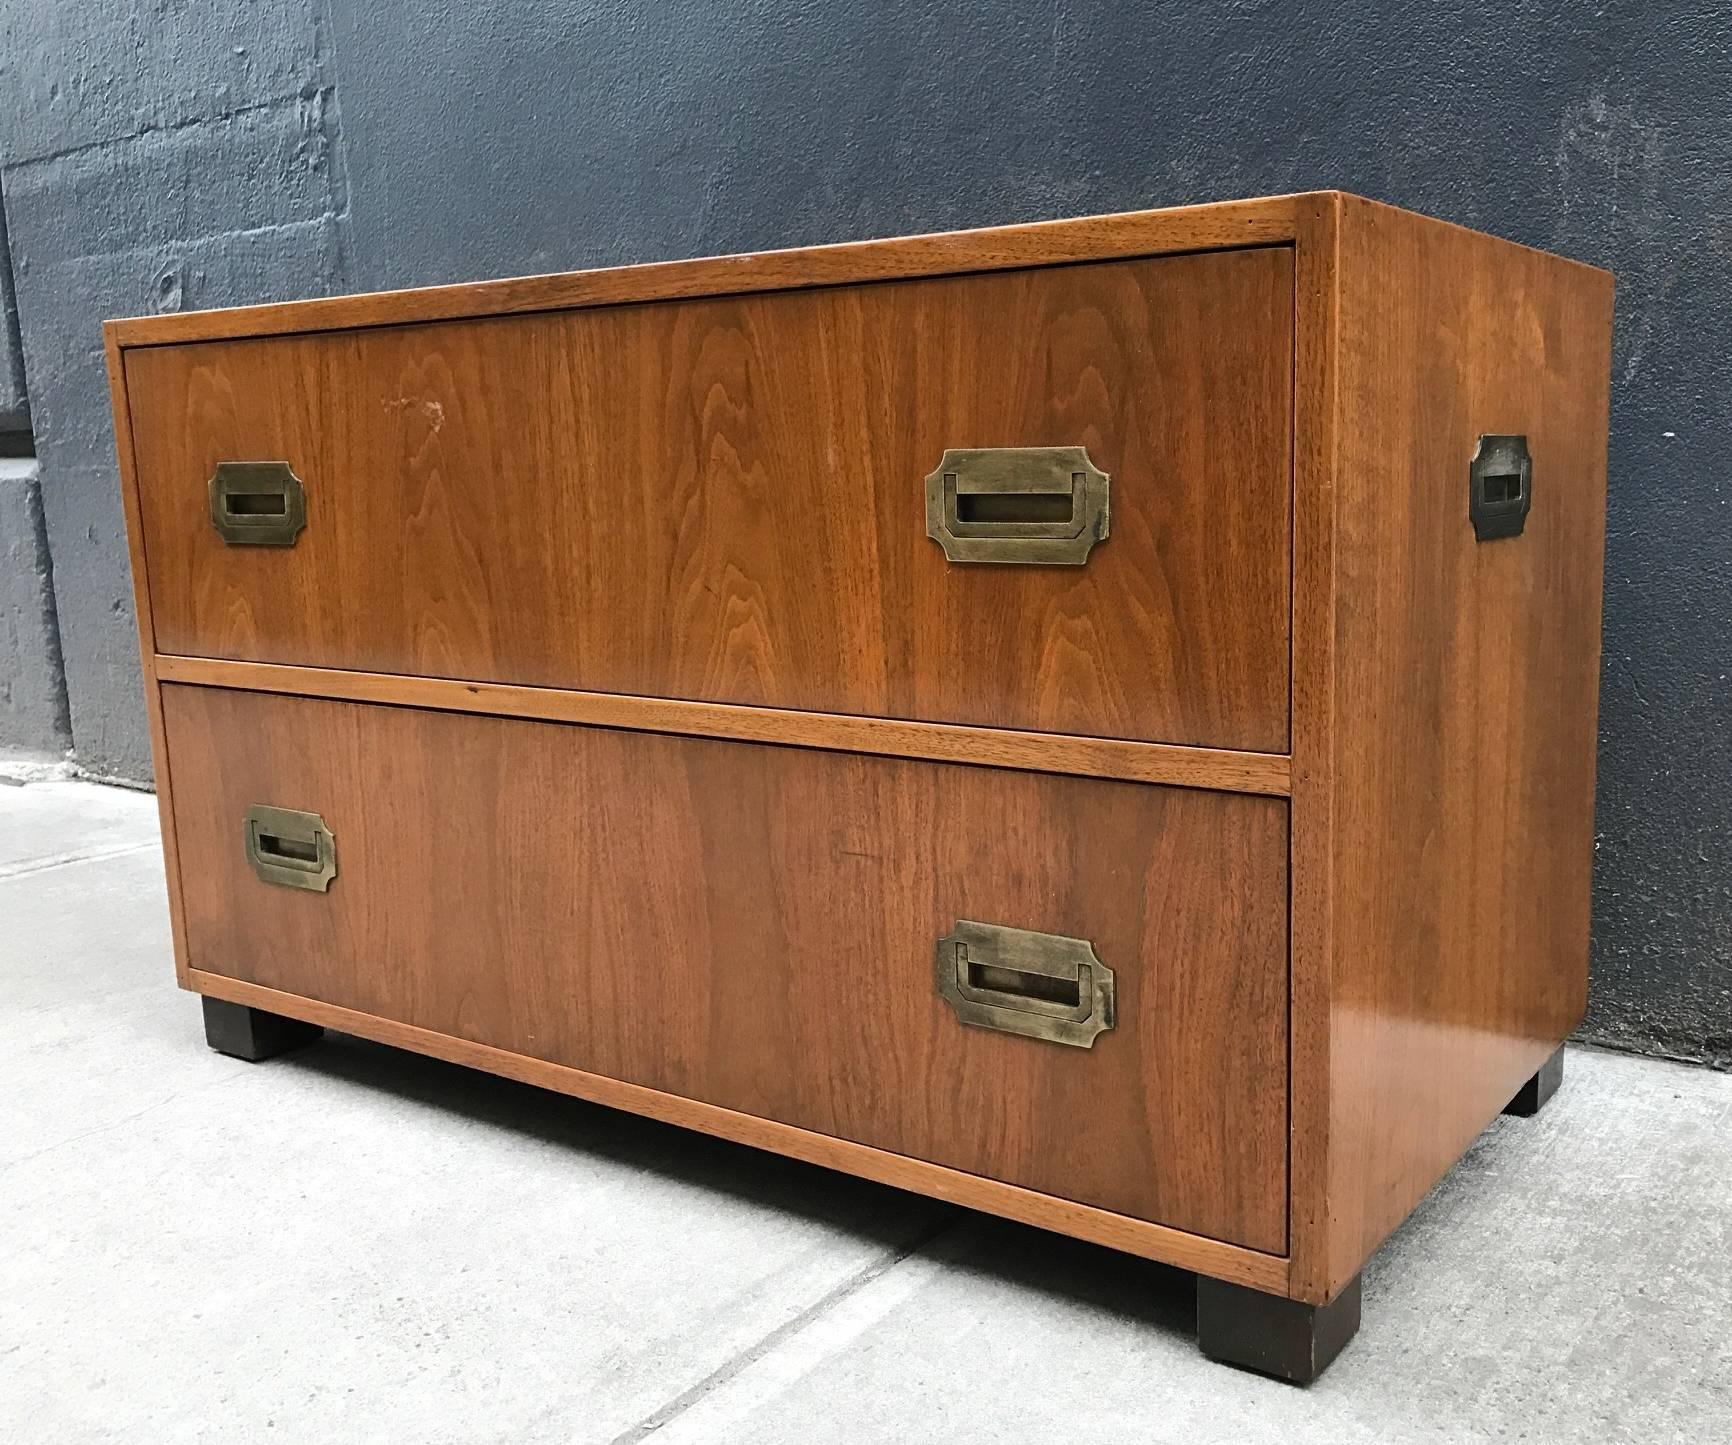 Pair of walnut baker Campaign chests. Has original brass hardware, black lacquered feet with two pull-out drawers.